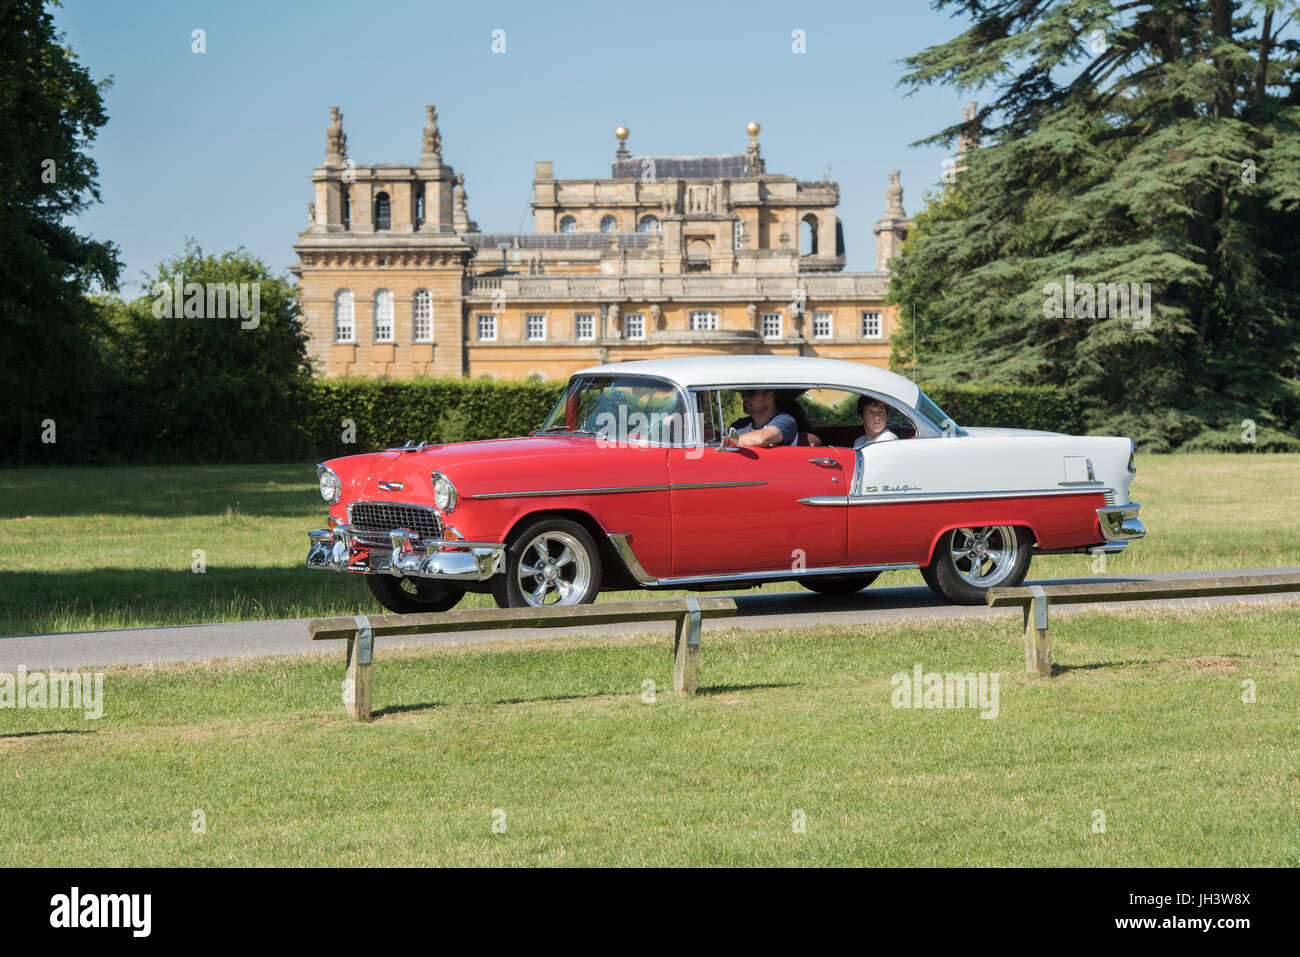 1955 Chevrolet Bel Air at Rally of the Giants american car show, Blenheim palace, Oxfordshire, England. Classic vintage American car Stock Photo